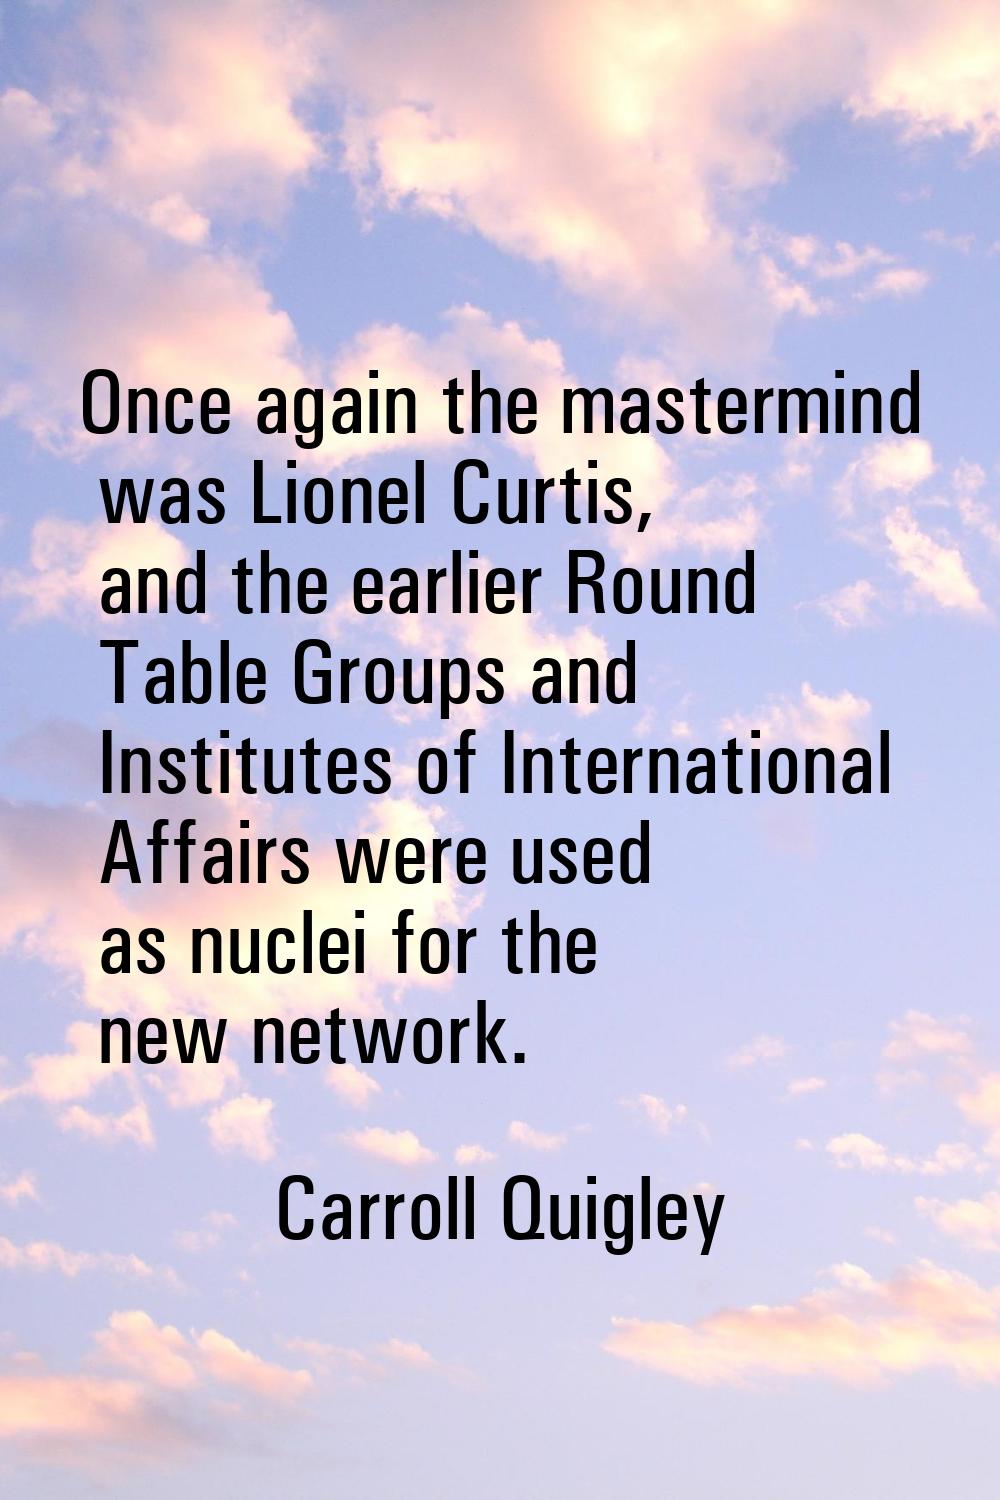 Once again the mastermind was Lionel Curtis, and the earlier Round Table Groups and Institutes of I